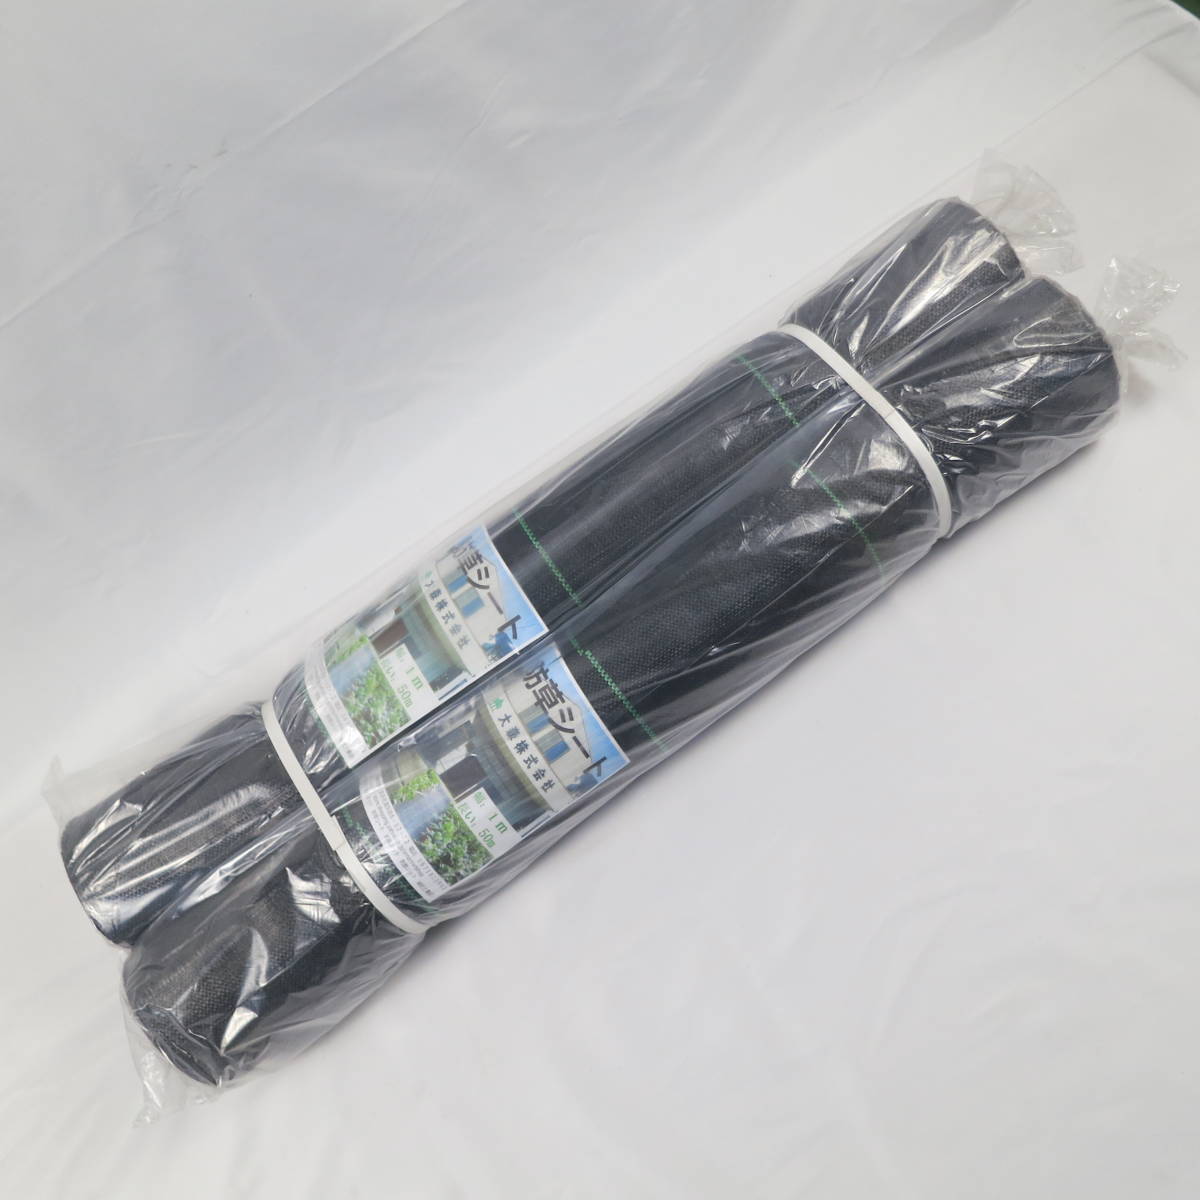  weed proofing seat 1m×50m 4ps.@ black free shipping 